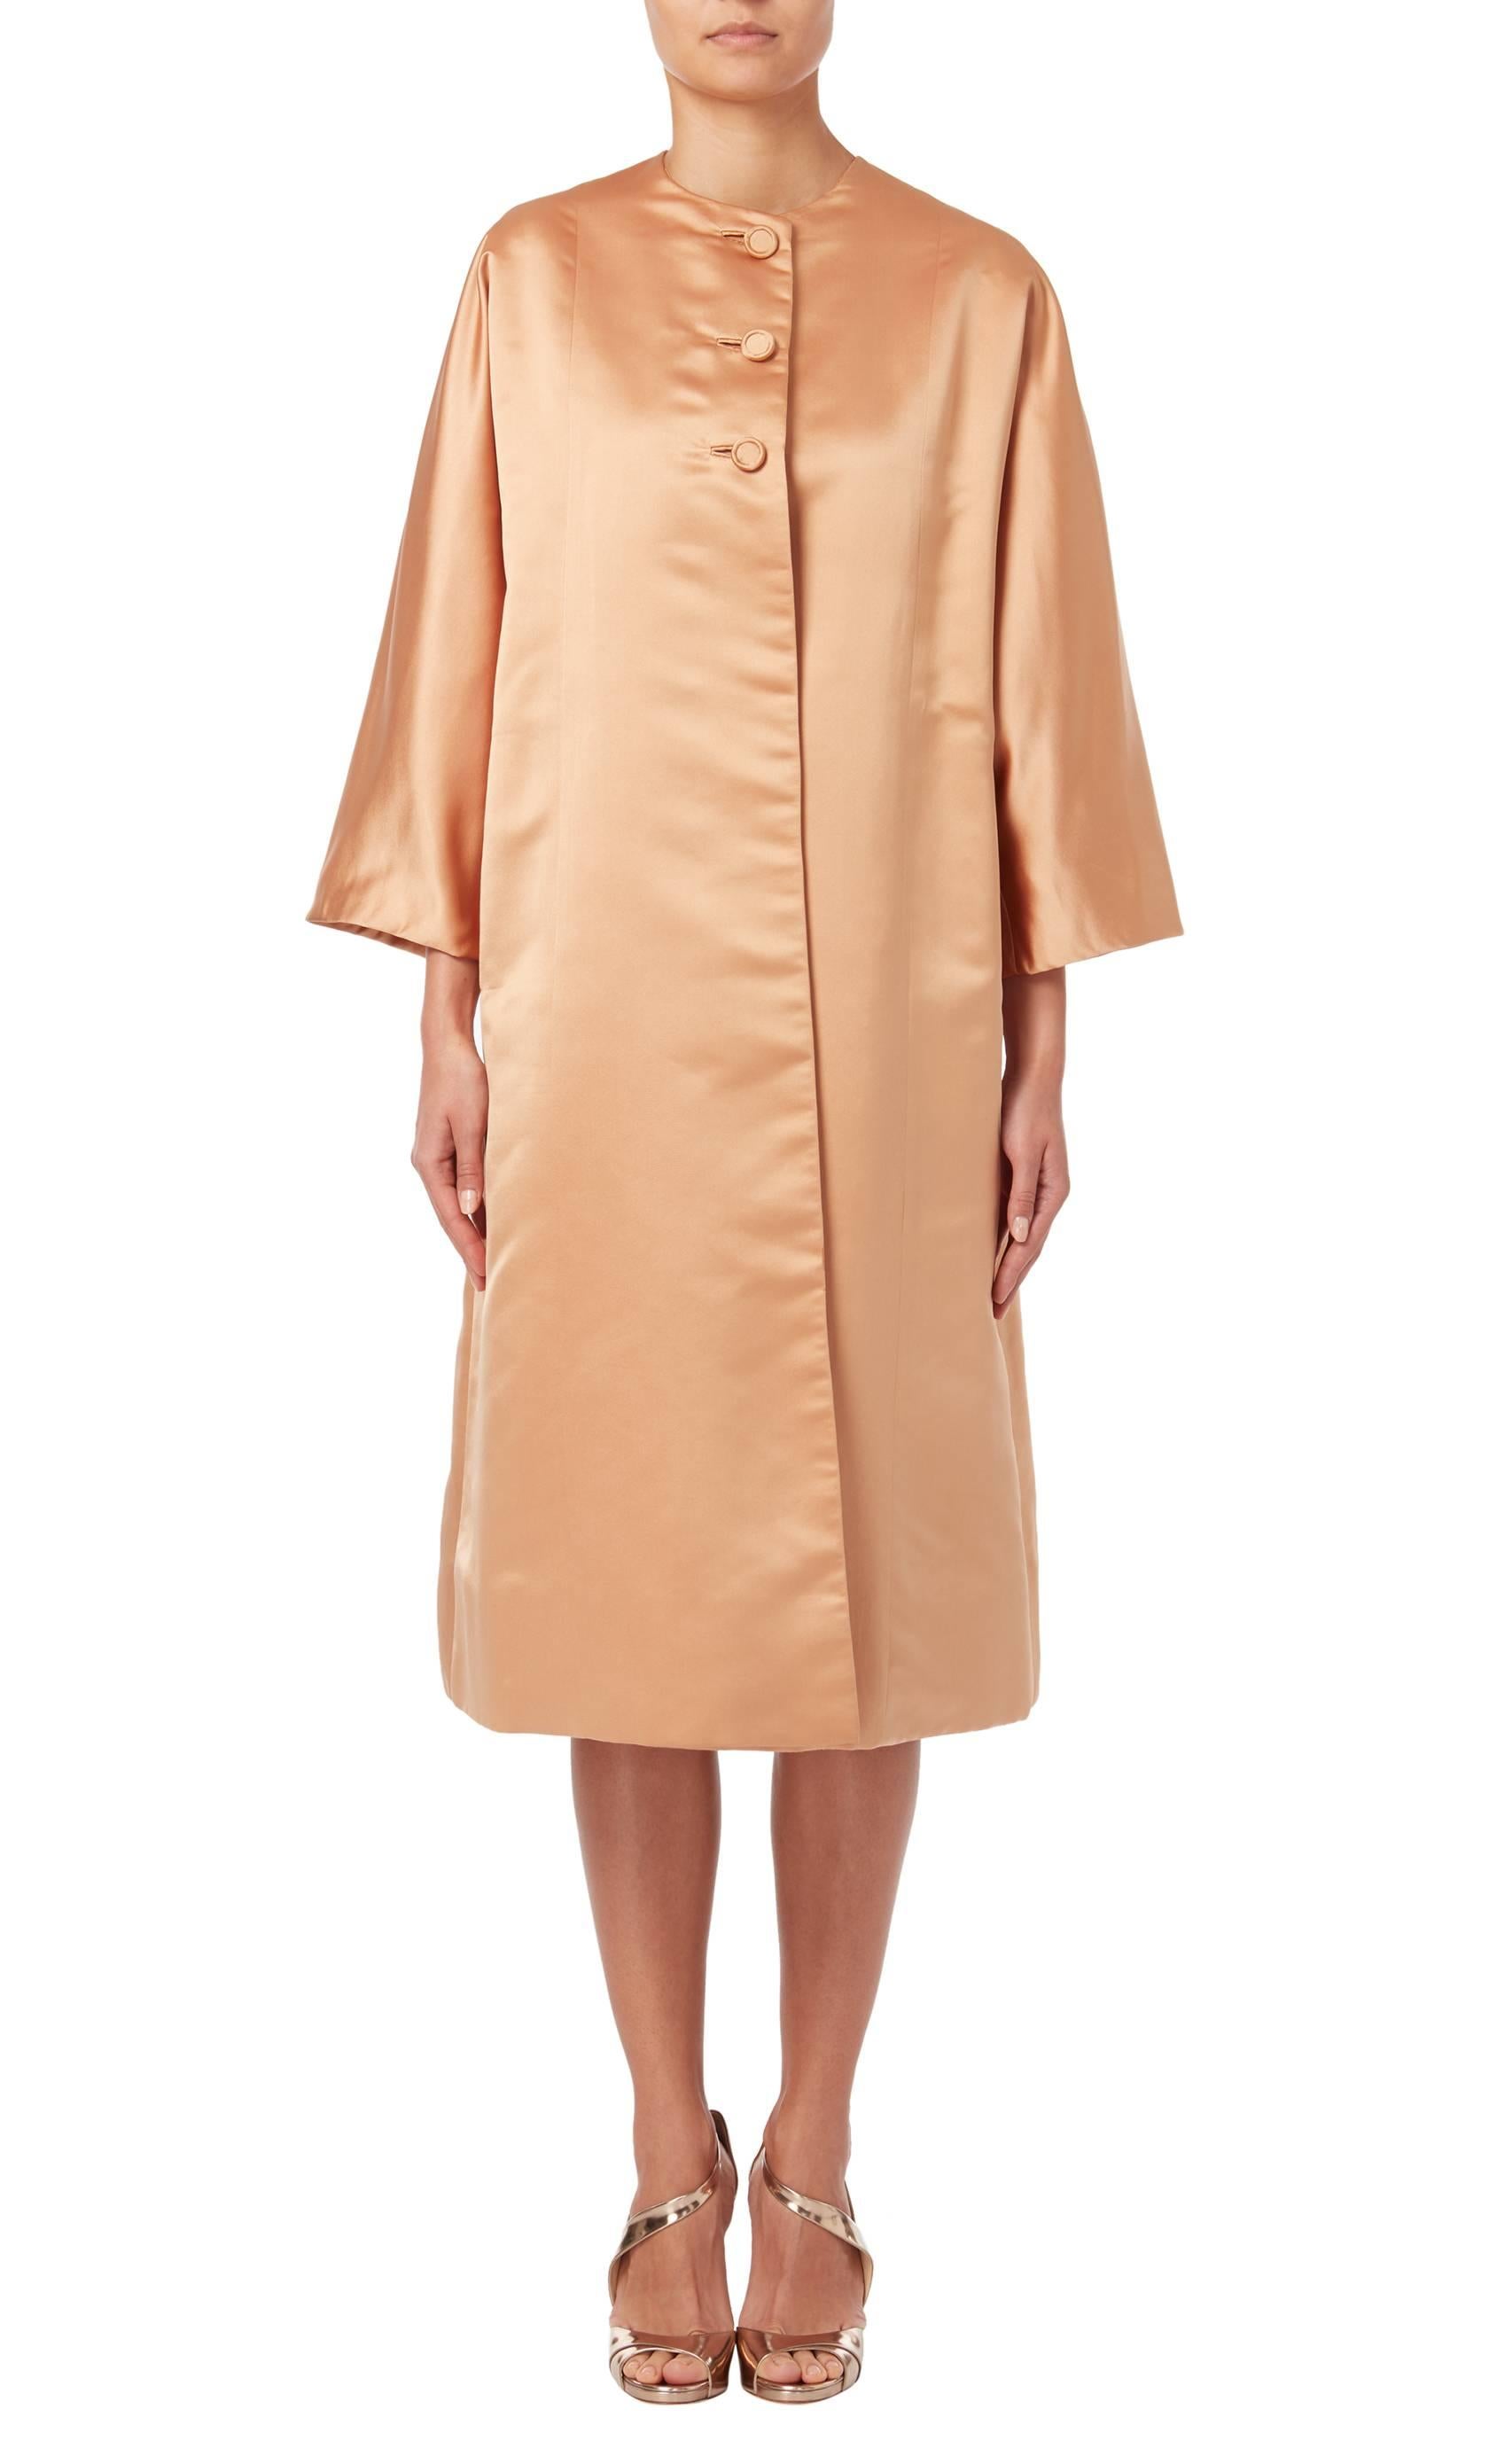 Peach silk coat by George Carmel, circa 1962. The coat features a round neck and is secured by three silk covered buttons to the front.